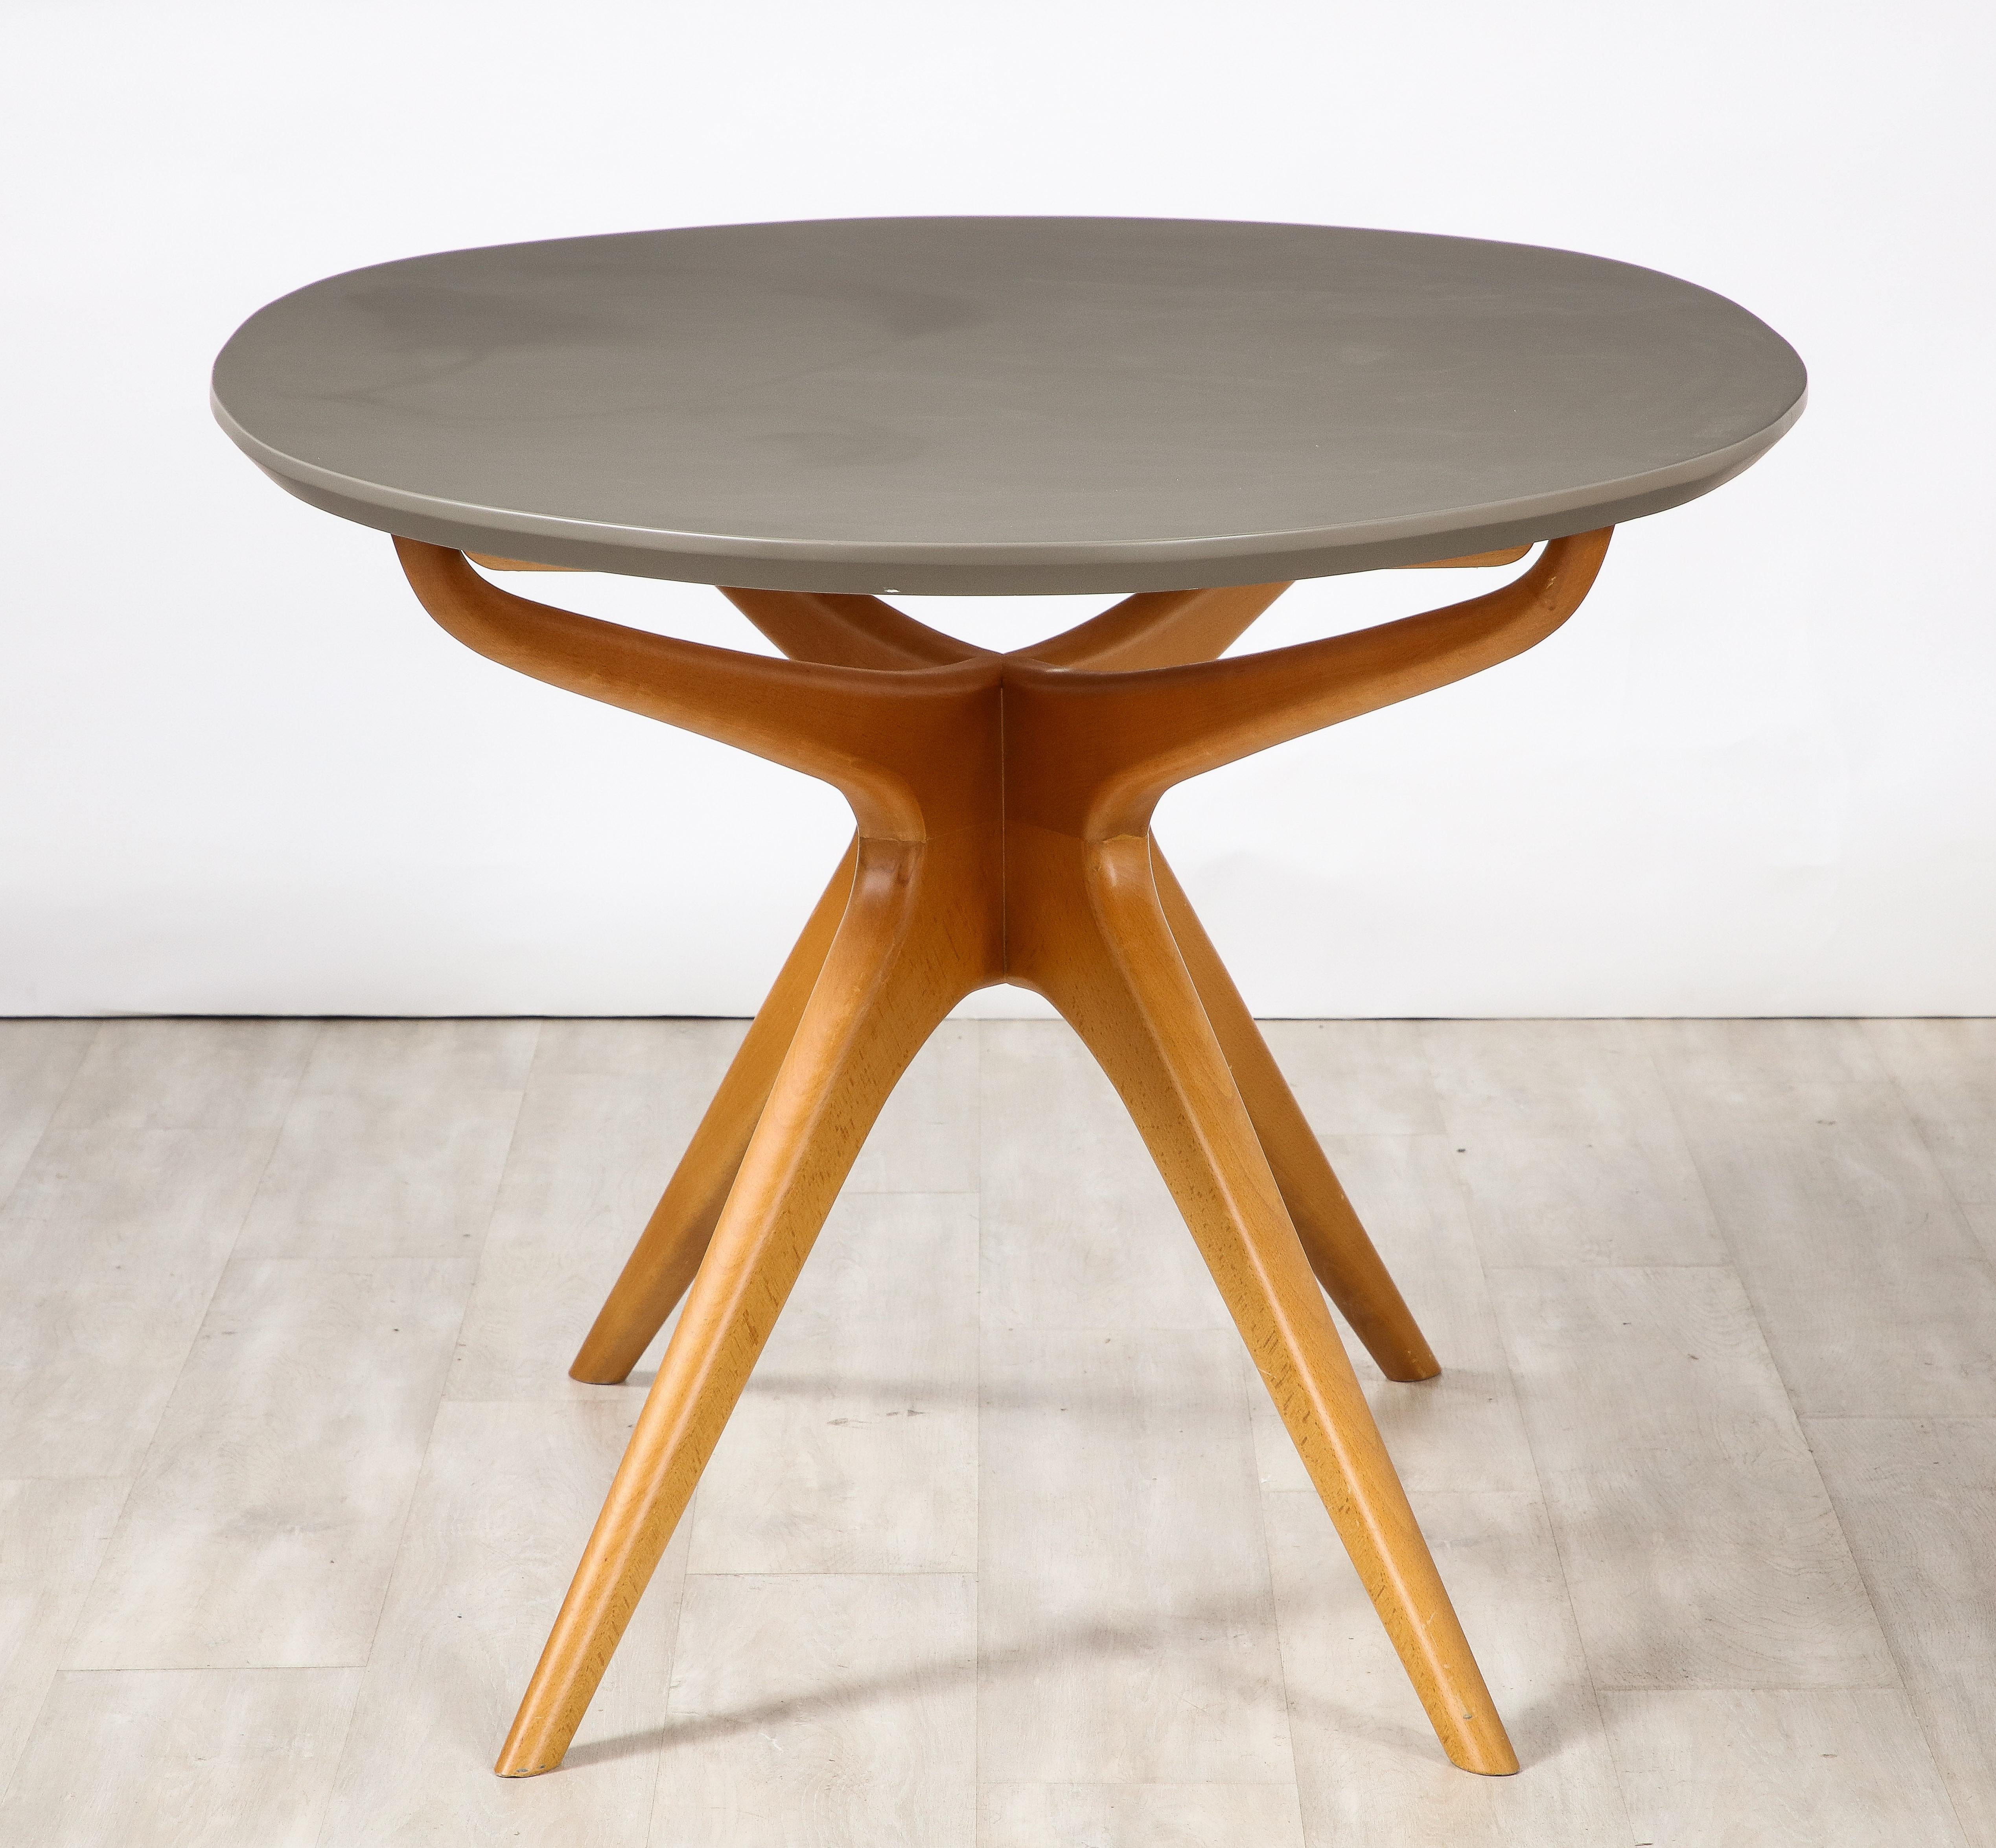 A stunning and highly unusual dining table attributed to visionary Italian designer Ico Parisi, the base in beech wood with dynamic angled legs supporting an oval laminate matte grey top over wood. Together, the whole is a sculptural masterpiece,